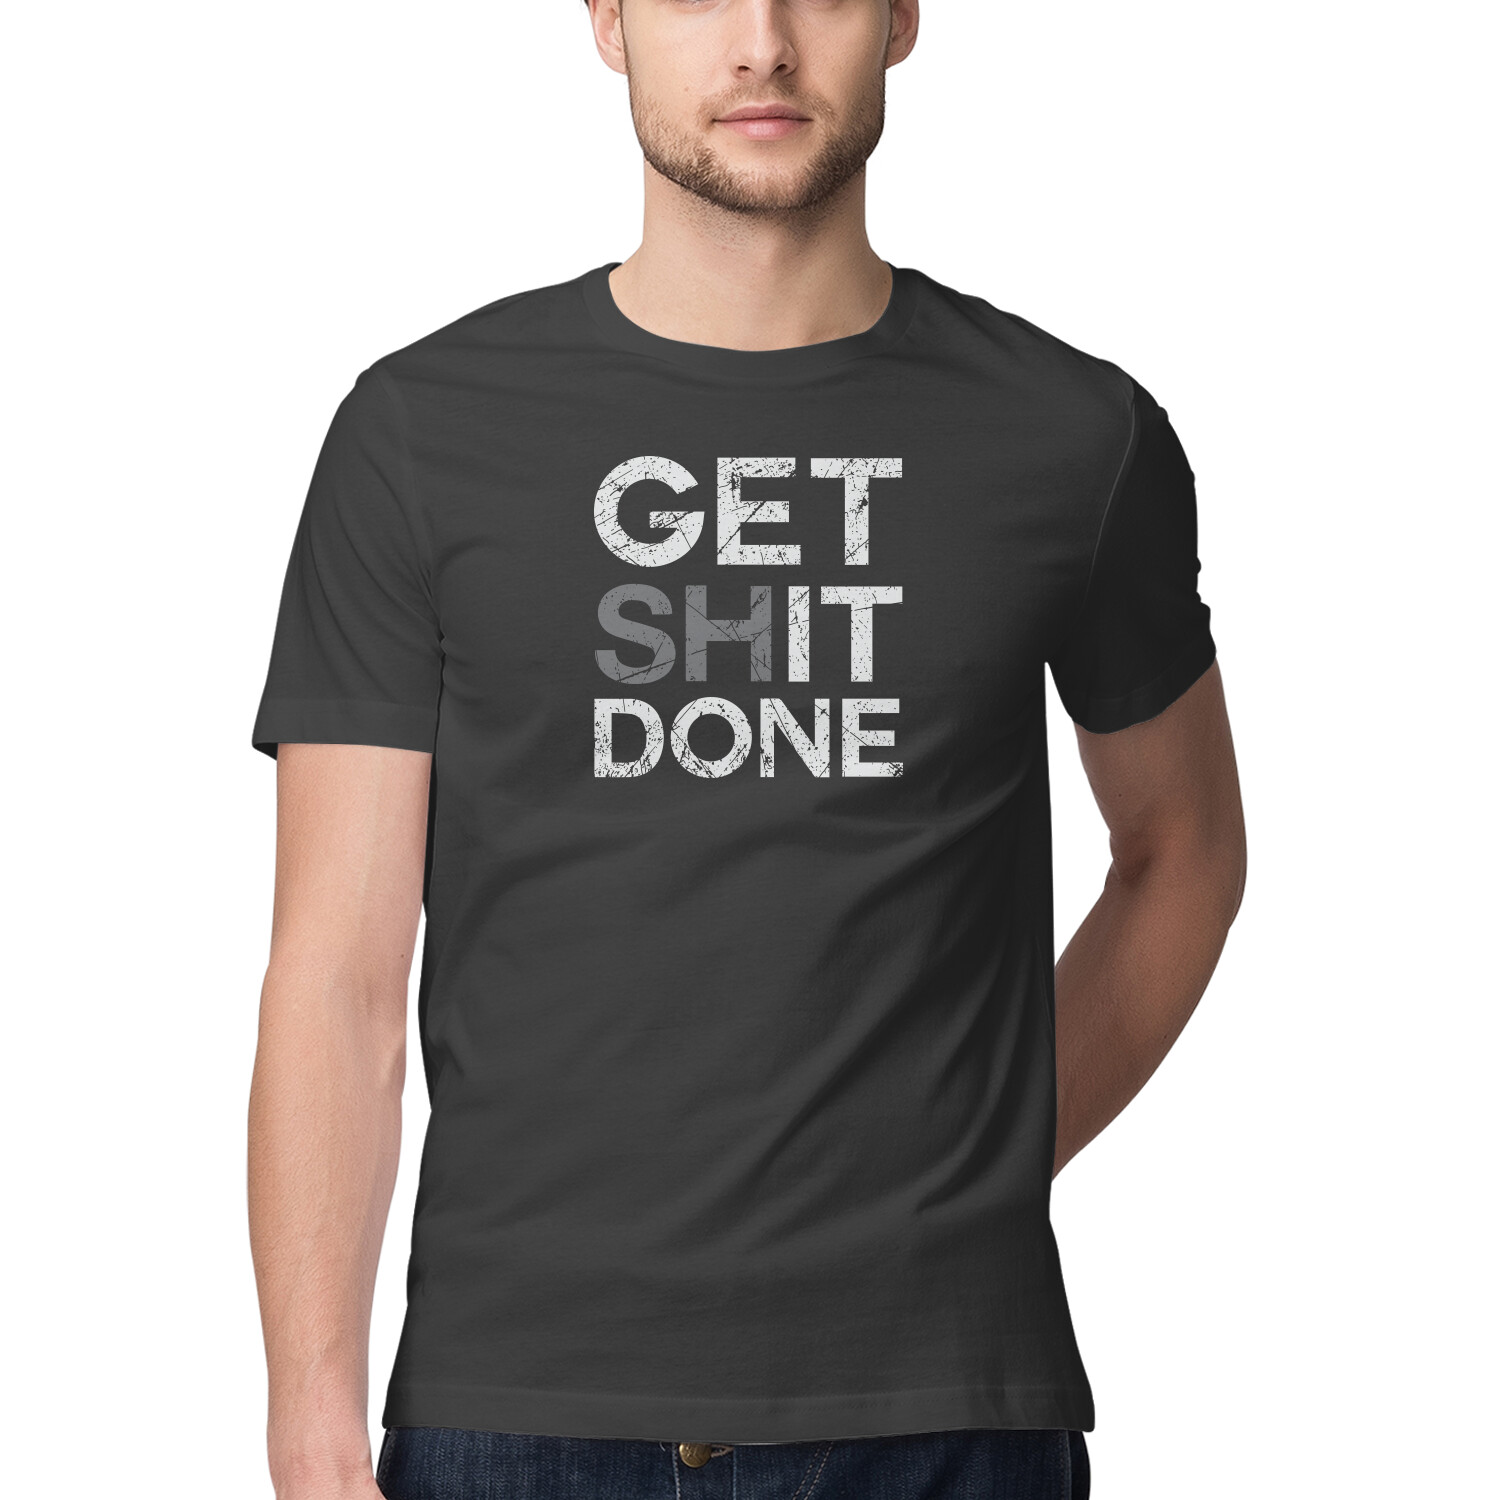 Get It Done, Funny T-shirt quotes and sayings